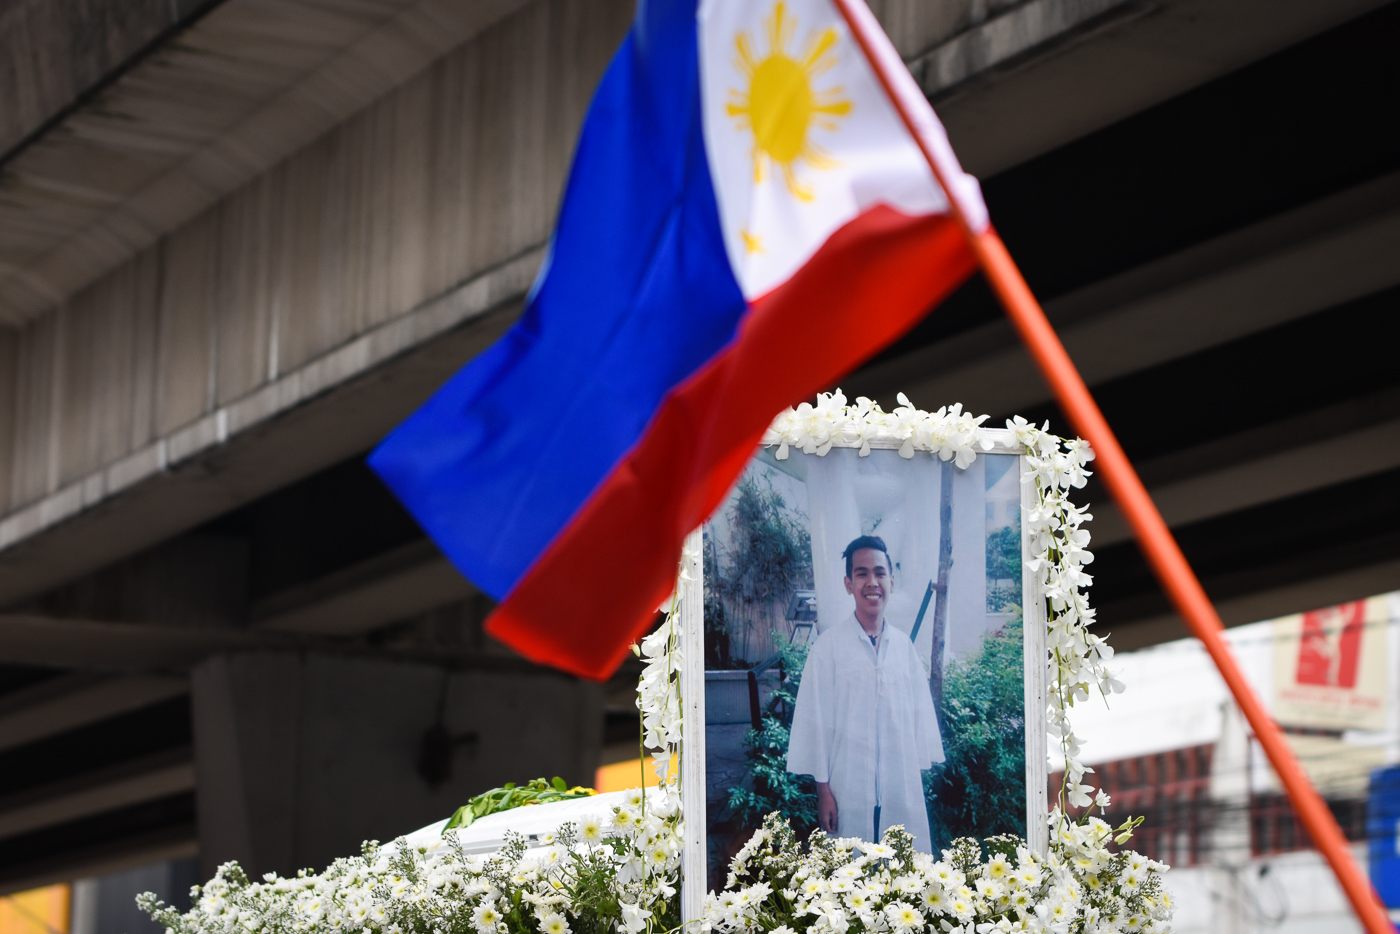 JUSTICE. The death of 17-year-old Kian delos Santos in August 2017 triggered massive condemnation from the public. Photo by LeAnne Jazul/Rappler 